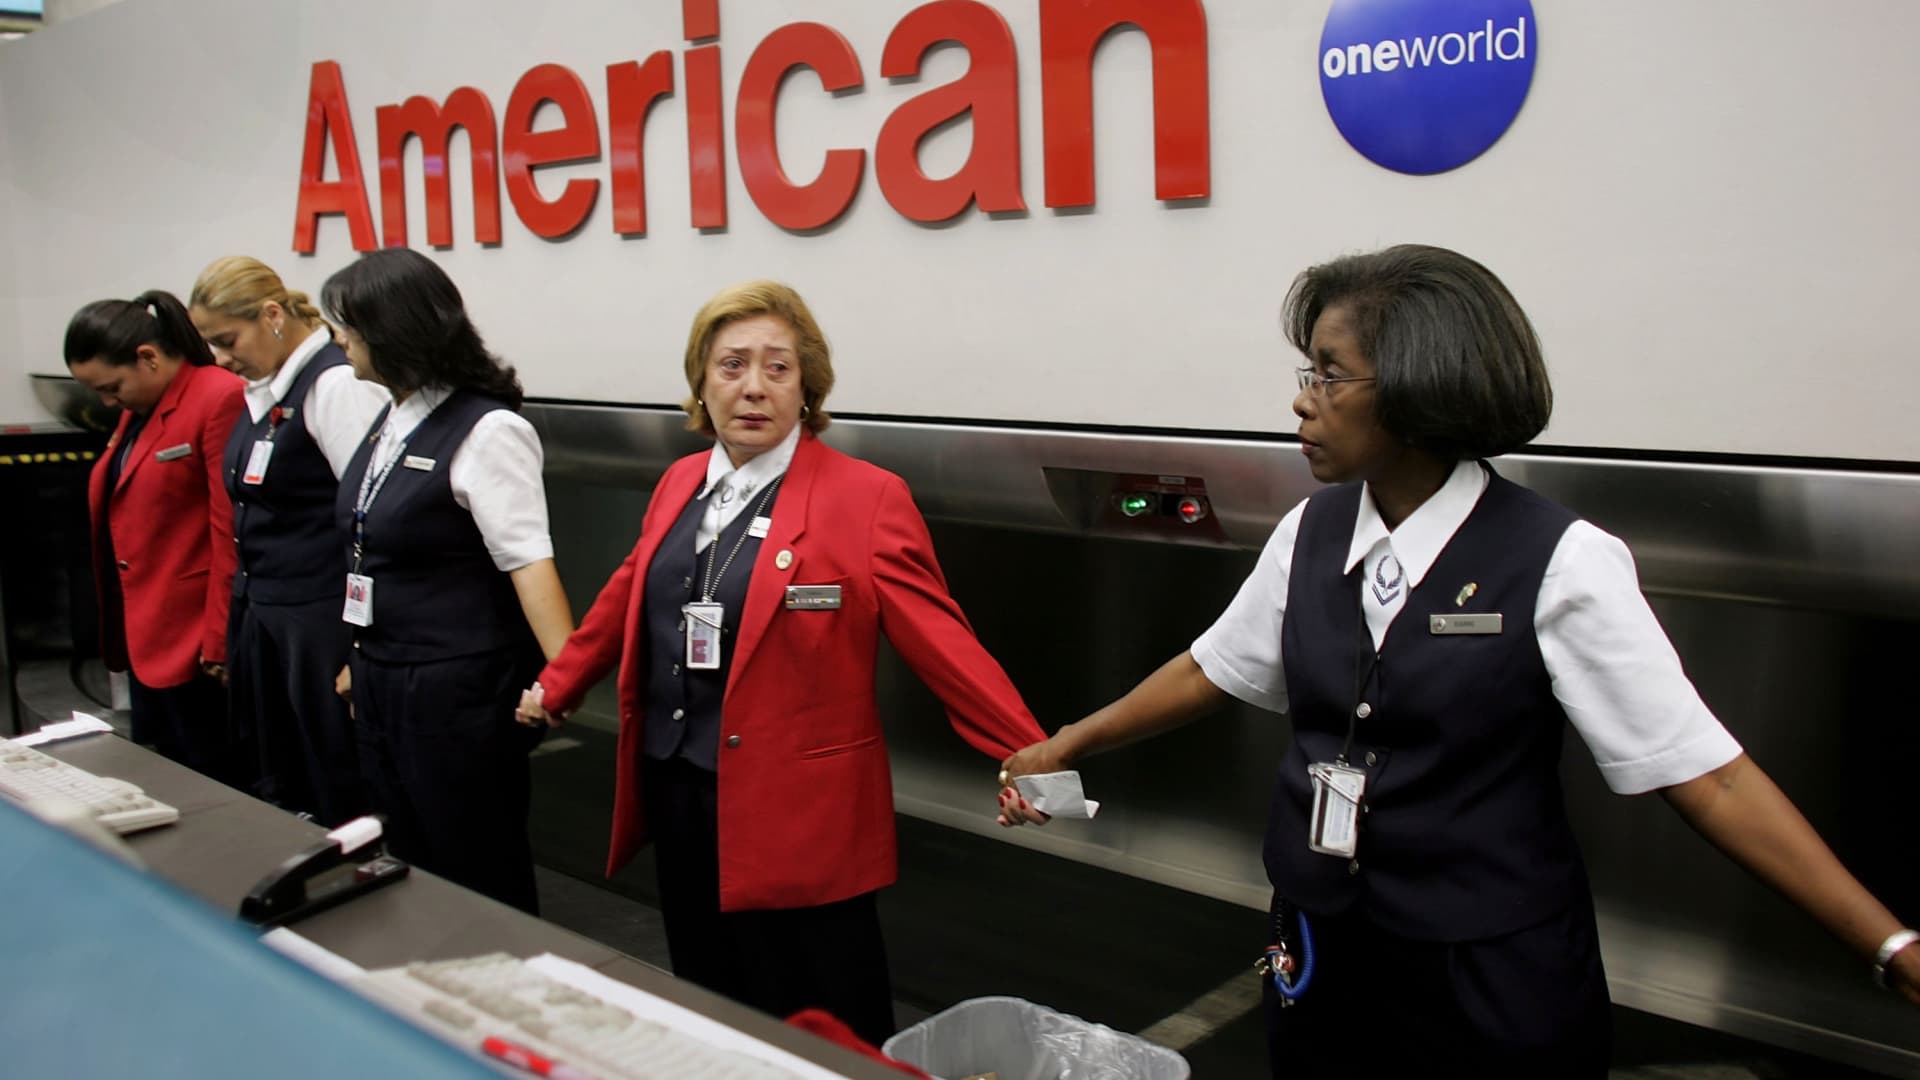 American Airlines employee Tamara Ronquillo (2nd-R) holds hands with her colleagues as they observe a moment of silence on the 5th anniversary of the September 11 terrorist attacks September 11, 2006 at the Miami International Airport in Miami, Florida.